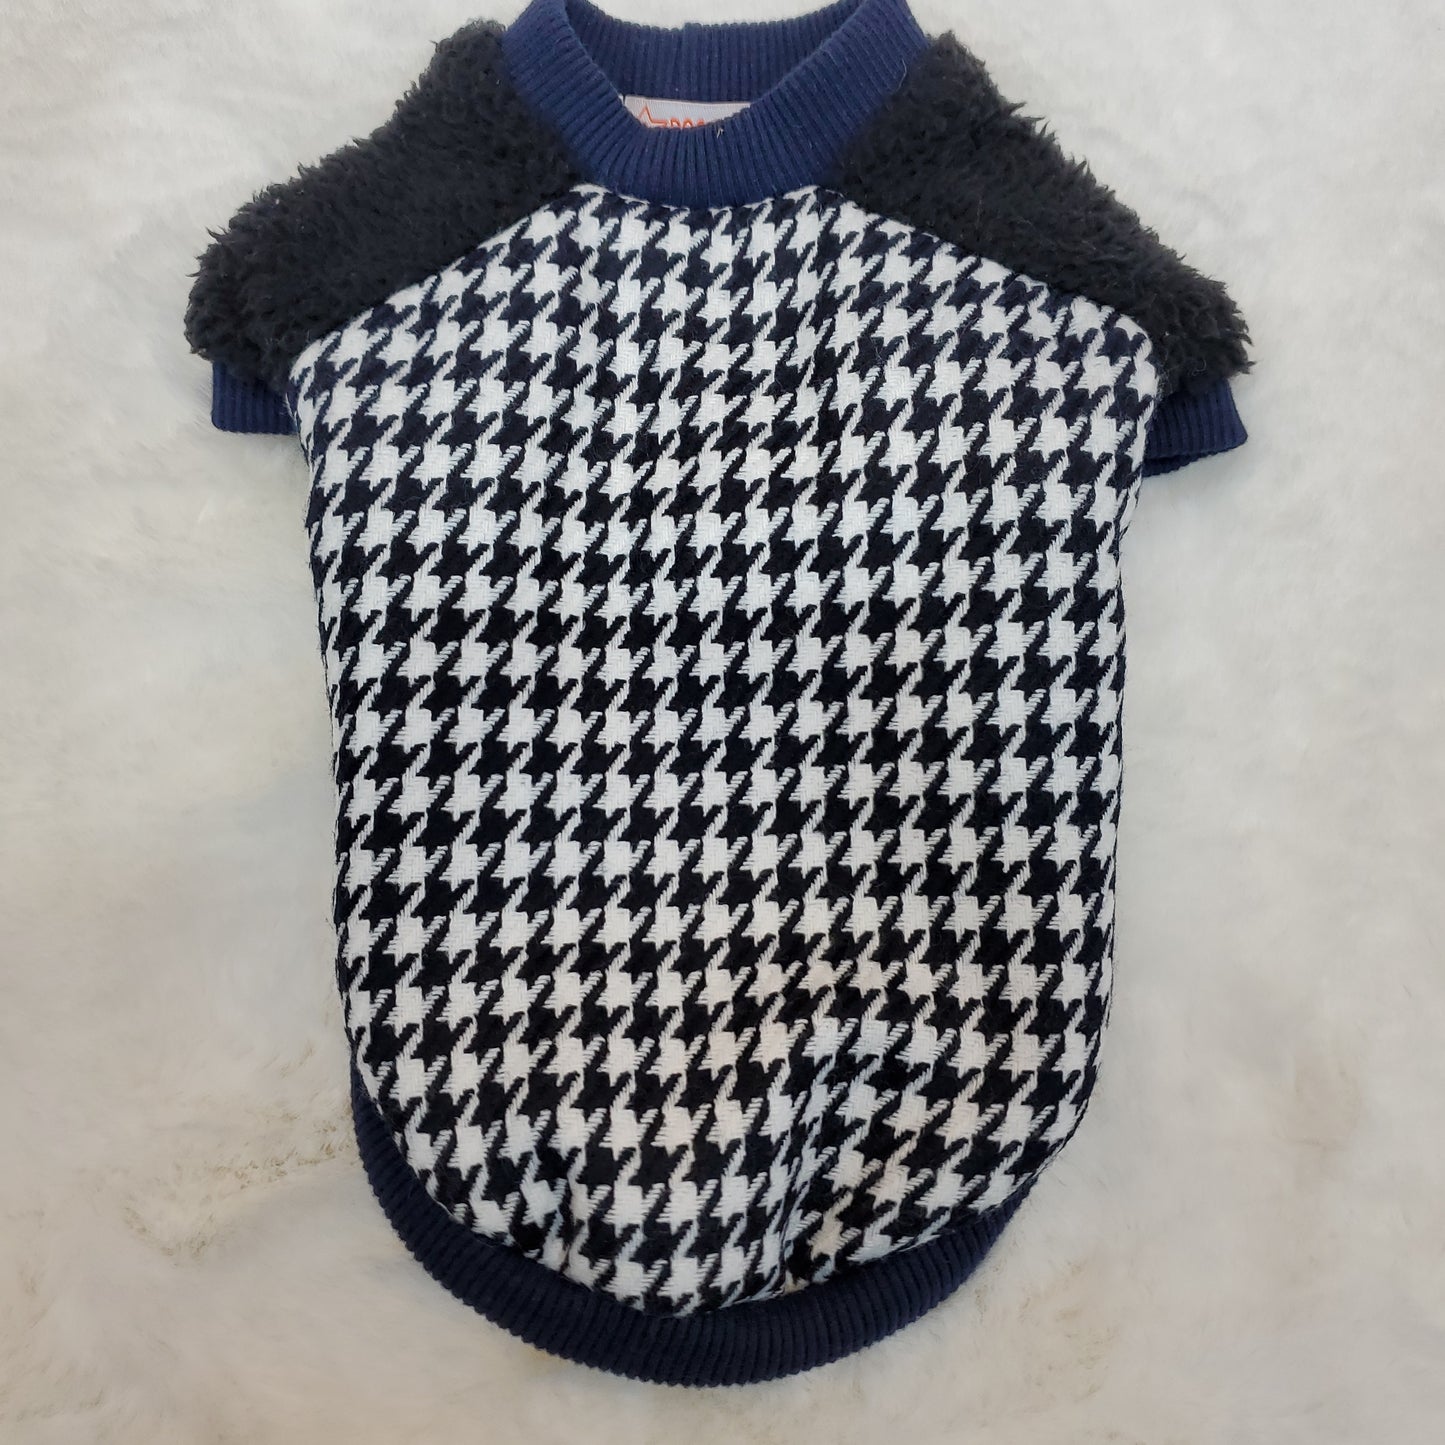 Fur & Houndstooth Sweater